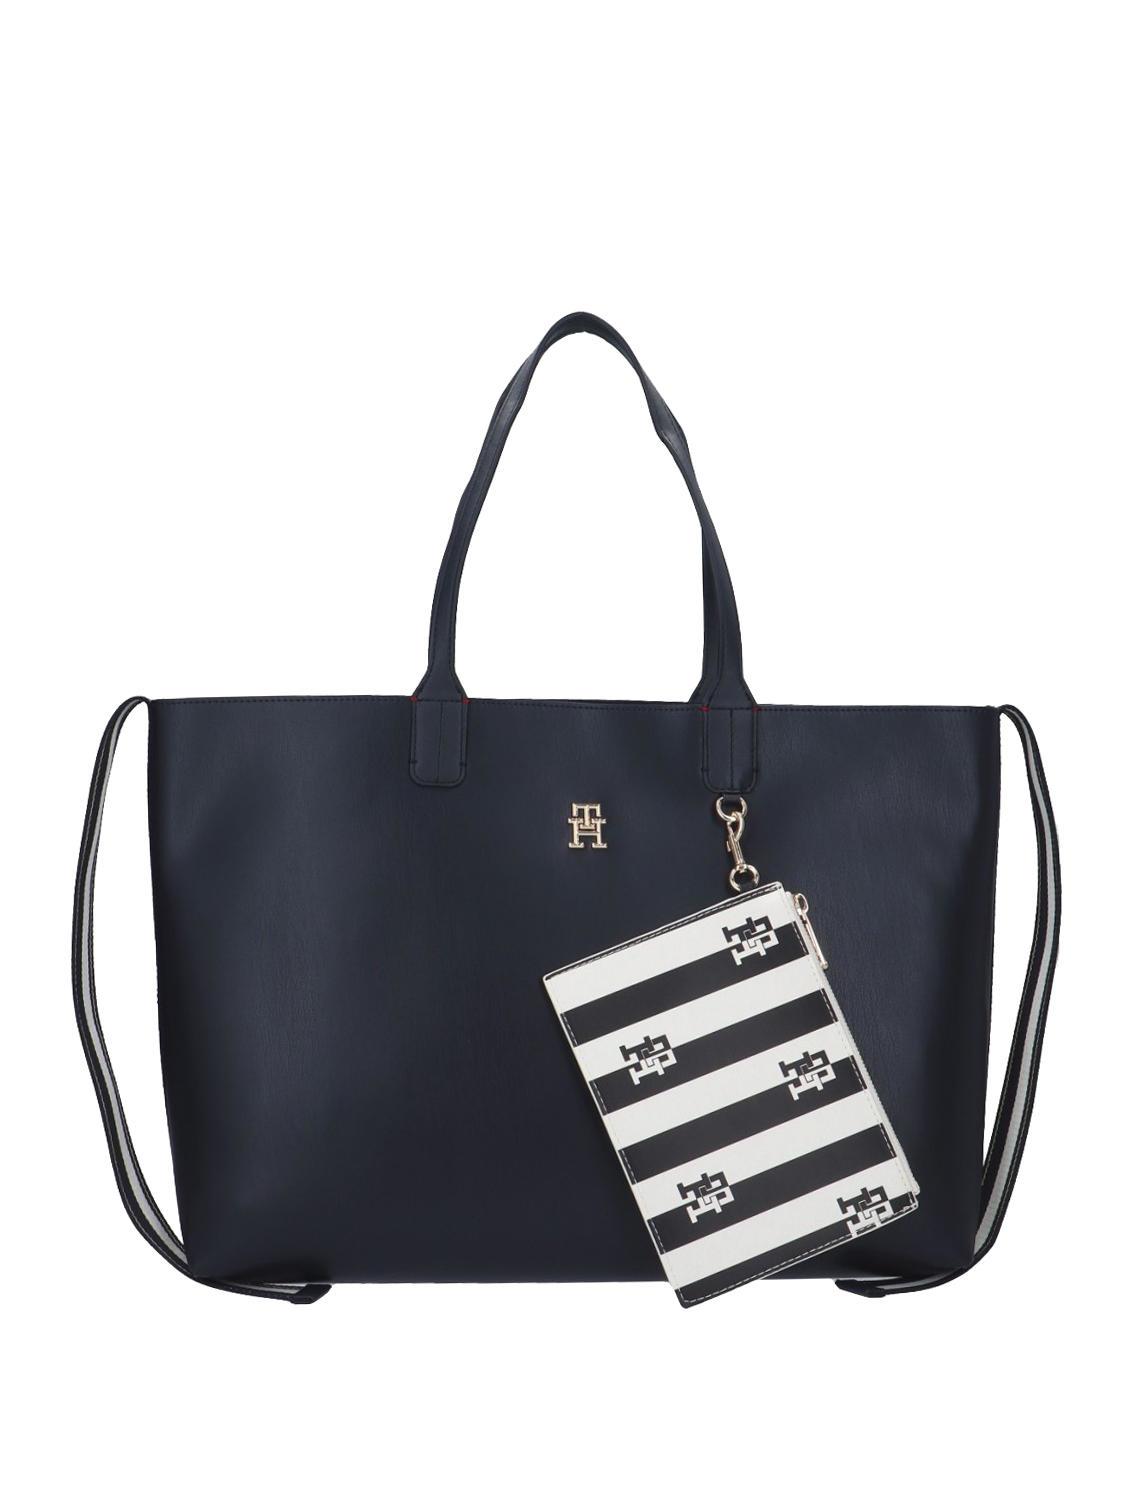 betaling Recollection I fare Tommy Hilfiger Iconic Shopping Bag With Clutch Space Blue - Buy At Outlet  Prices!